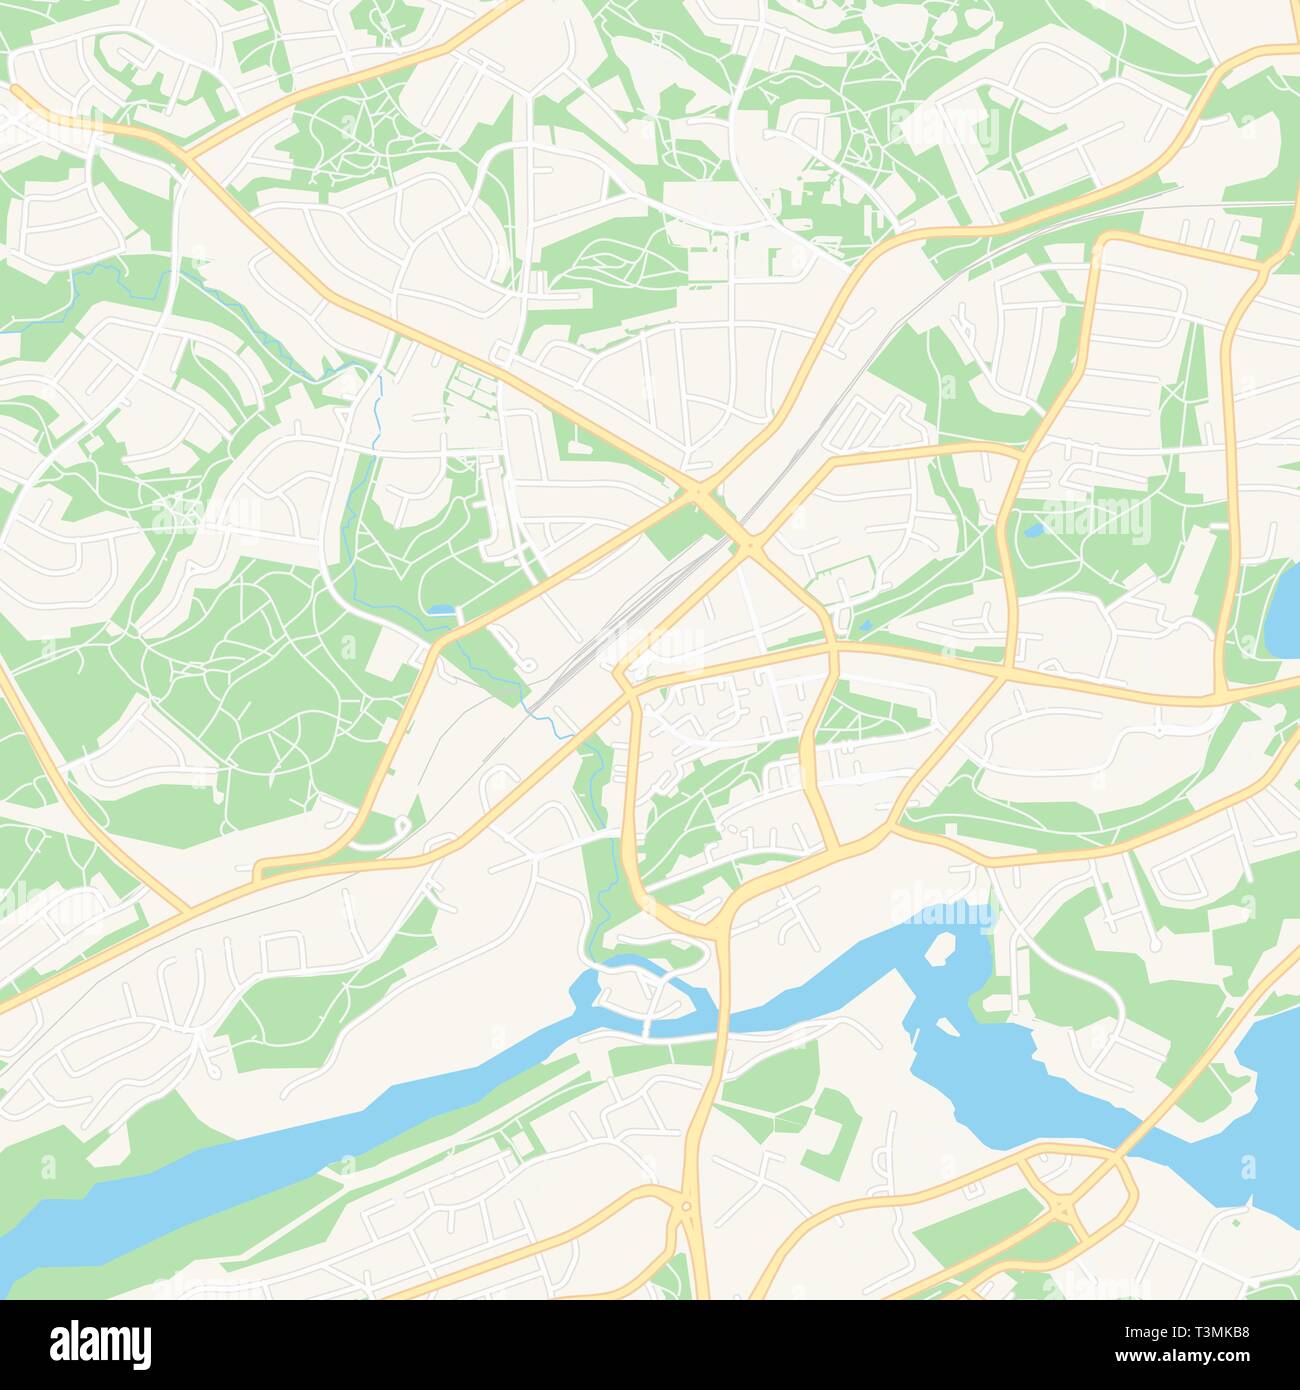 Printable map of Nokia, Finland with main and secondary roads and larger railways. This map is carefully designed for routing and placing individual d Stock Vector